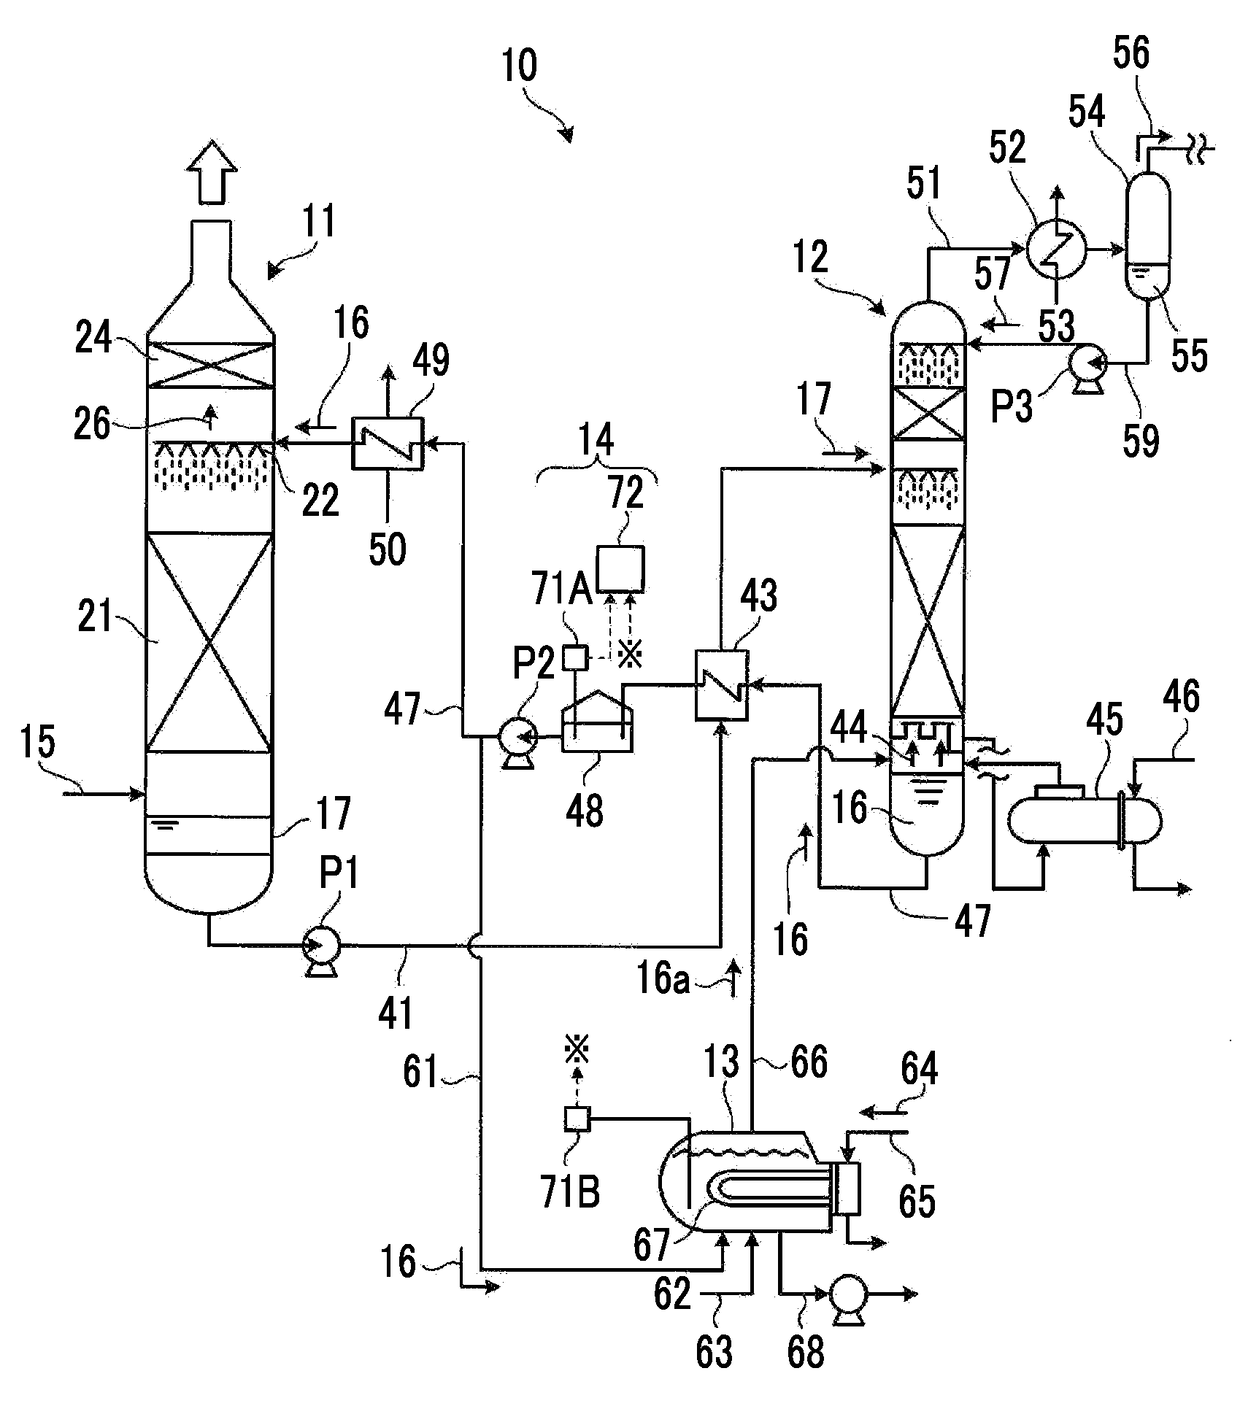 Degradant concentration measurement device and acidic gas removal device